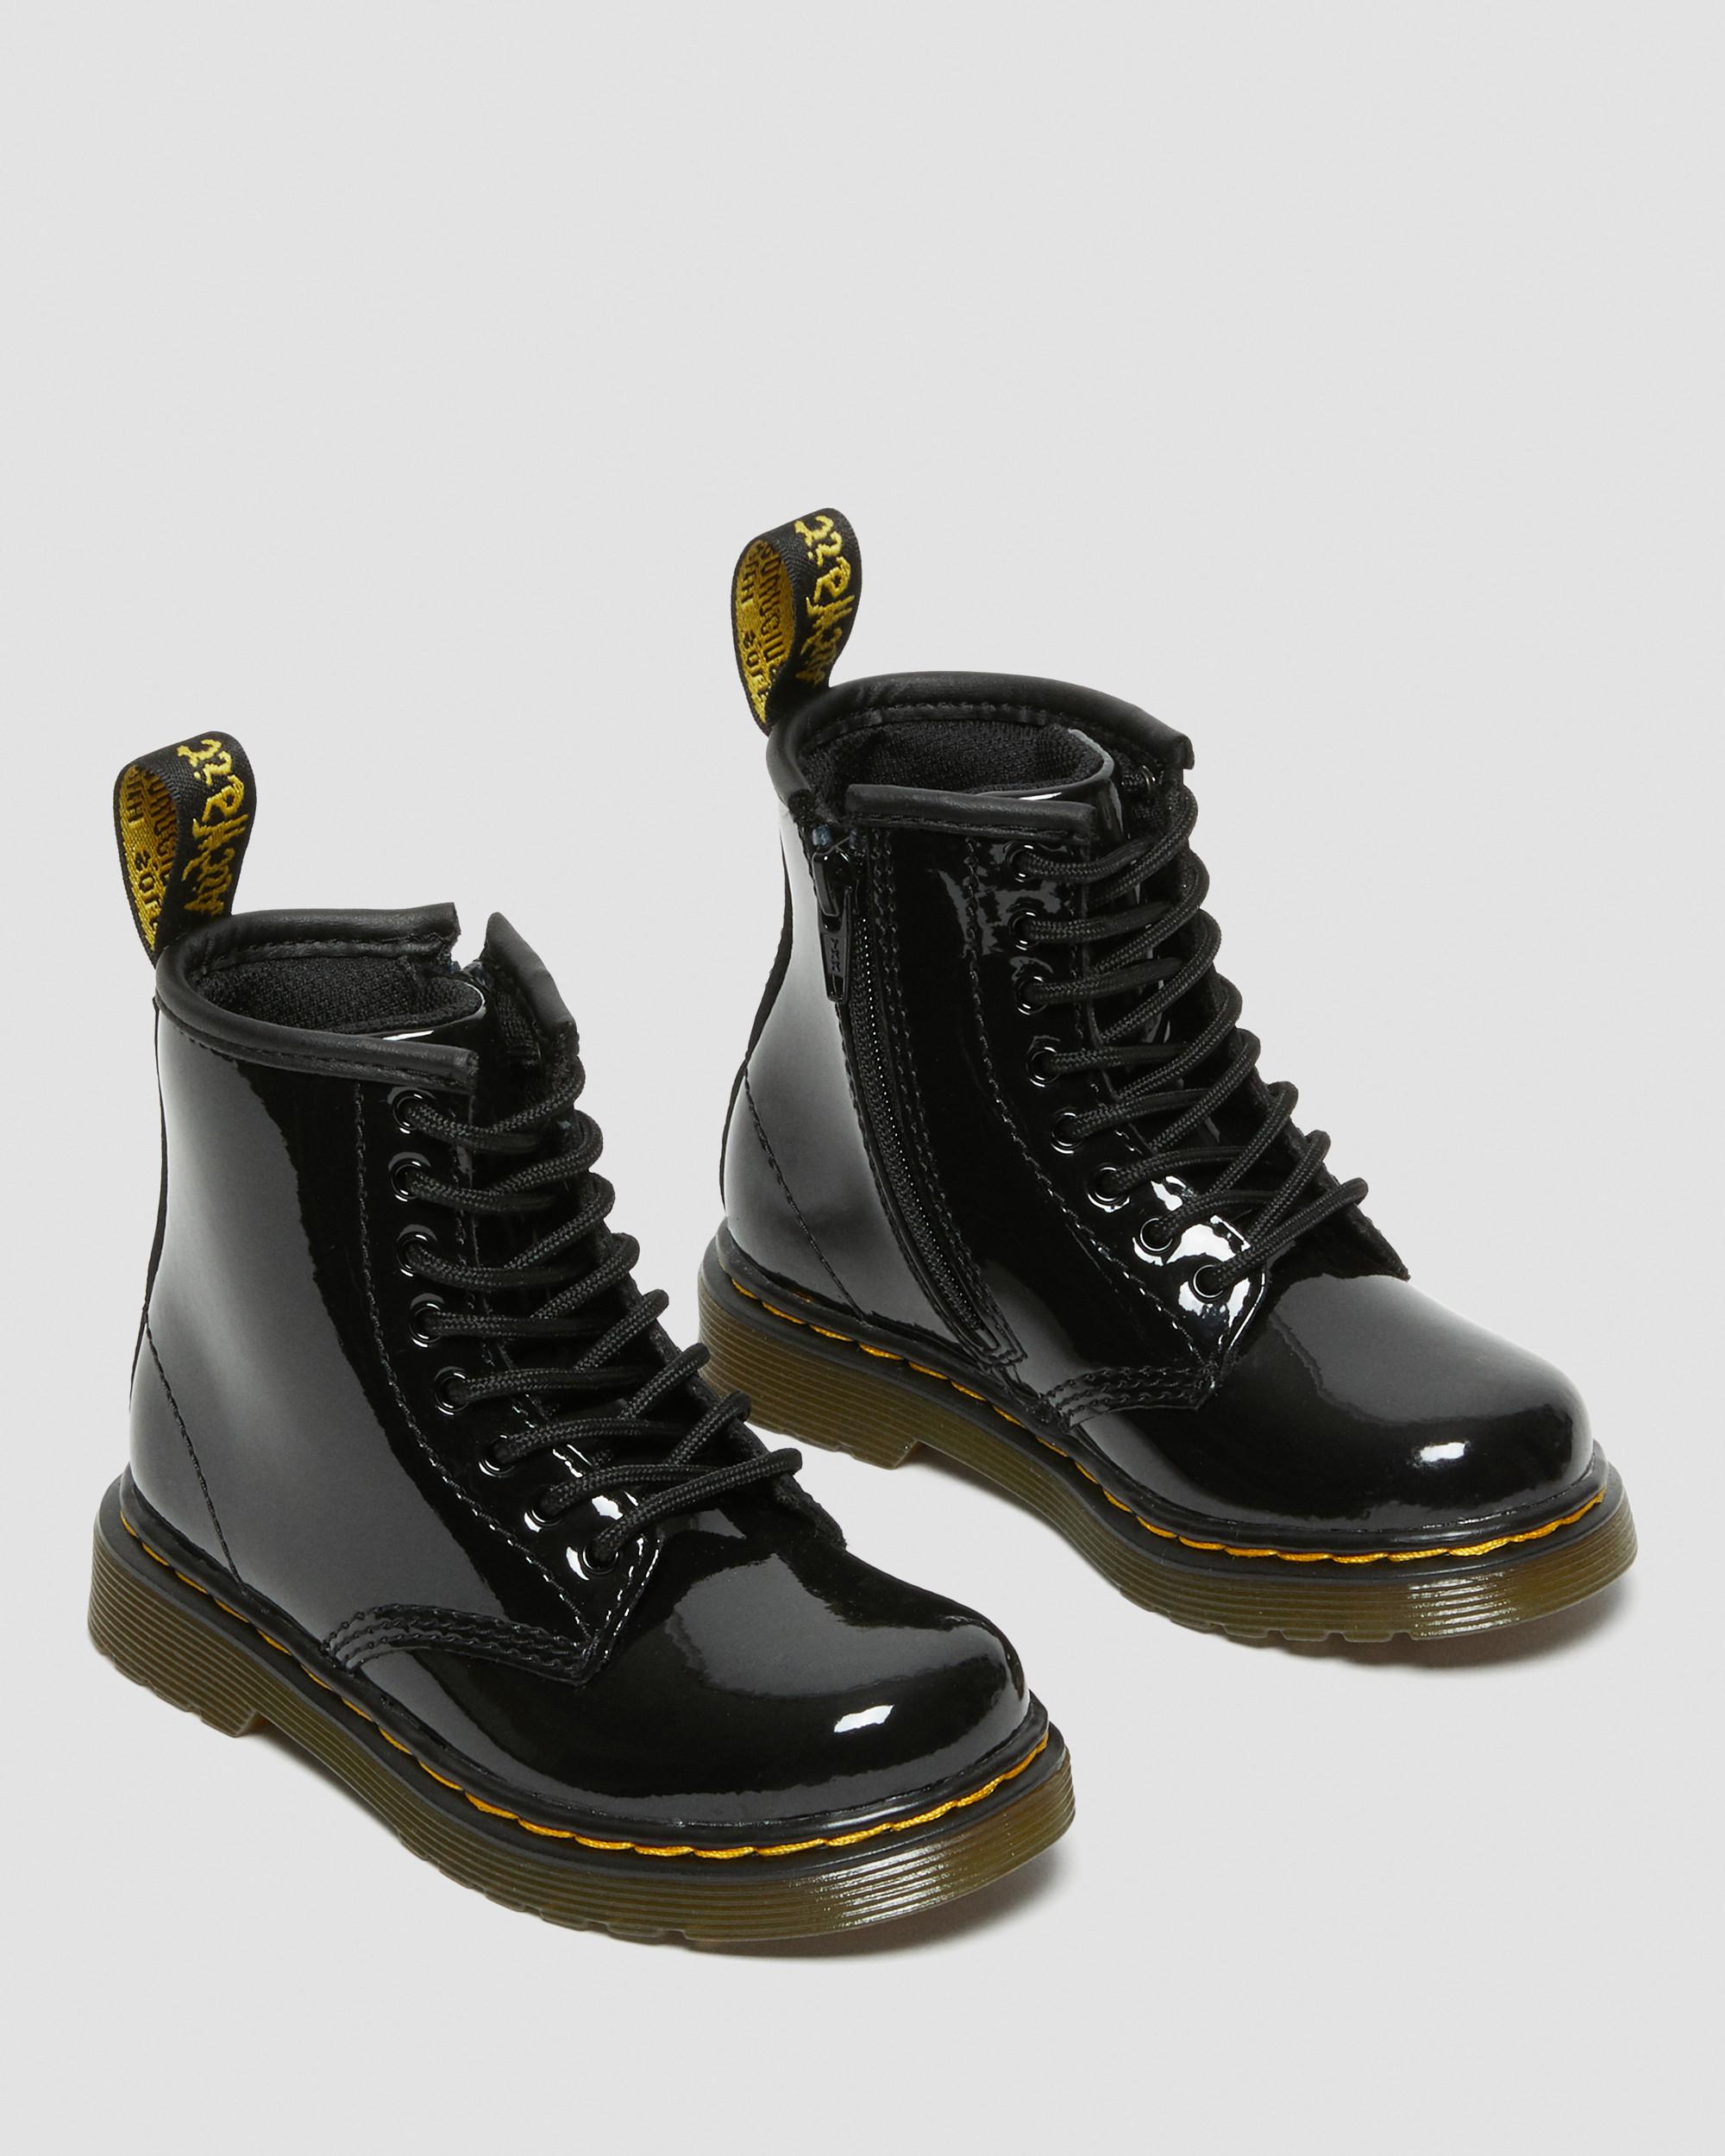 Toddler 1460 Patent Leather Lace Up Boots in Black